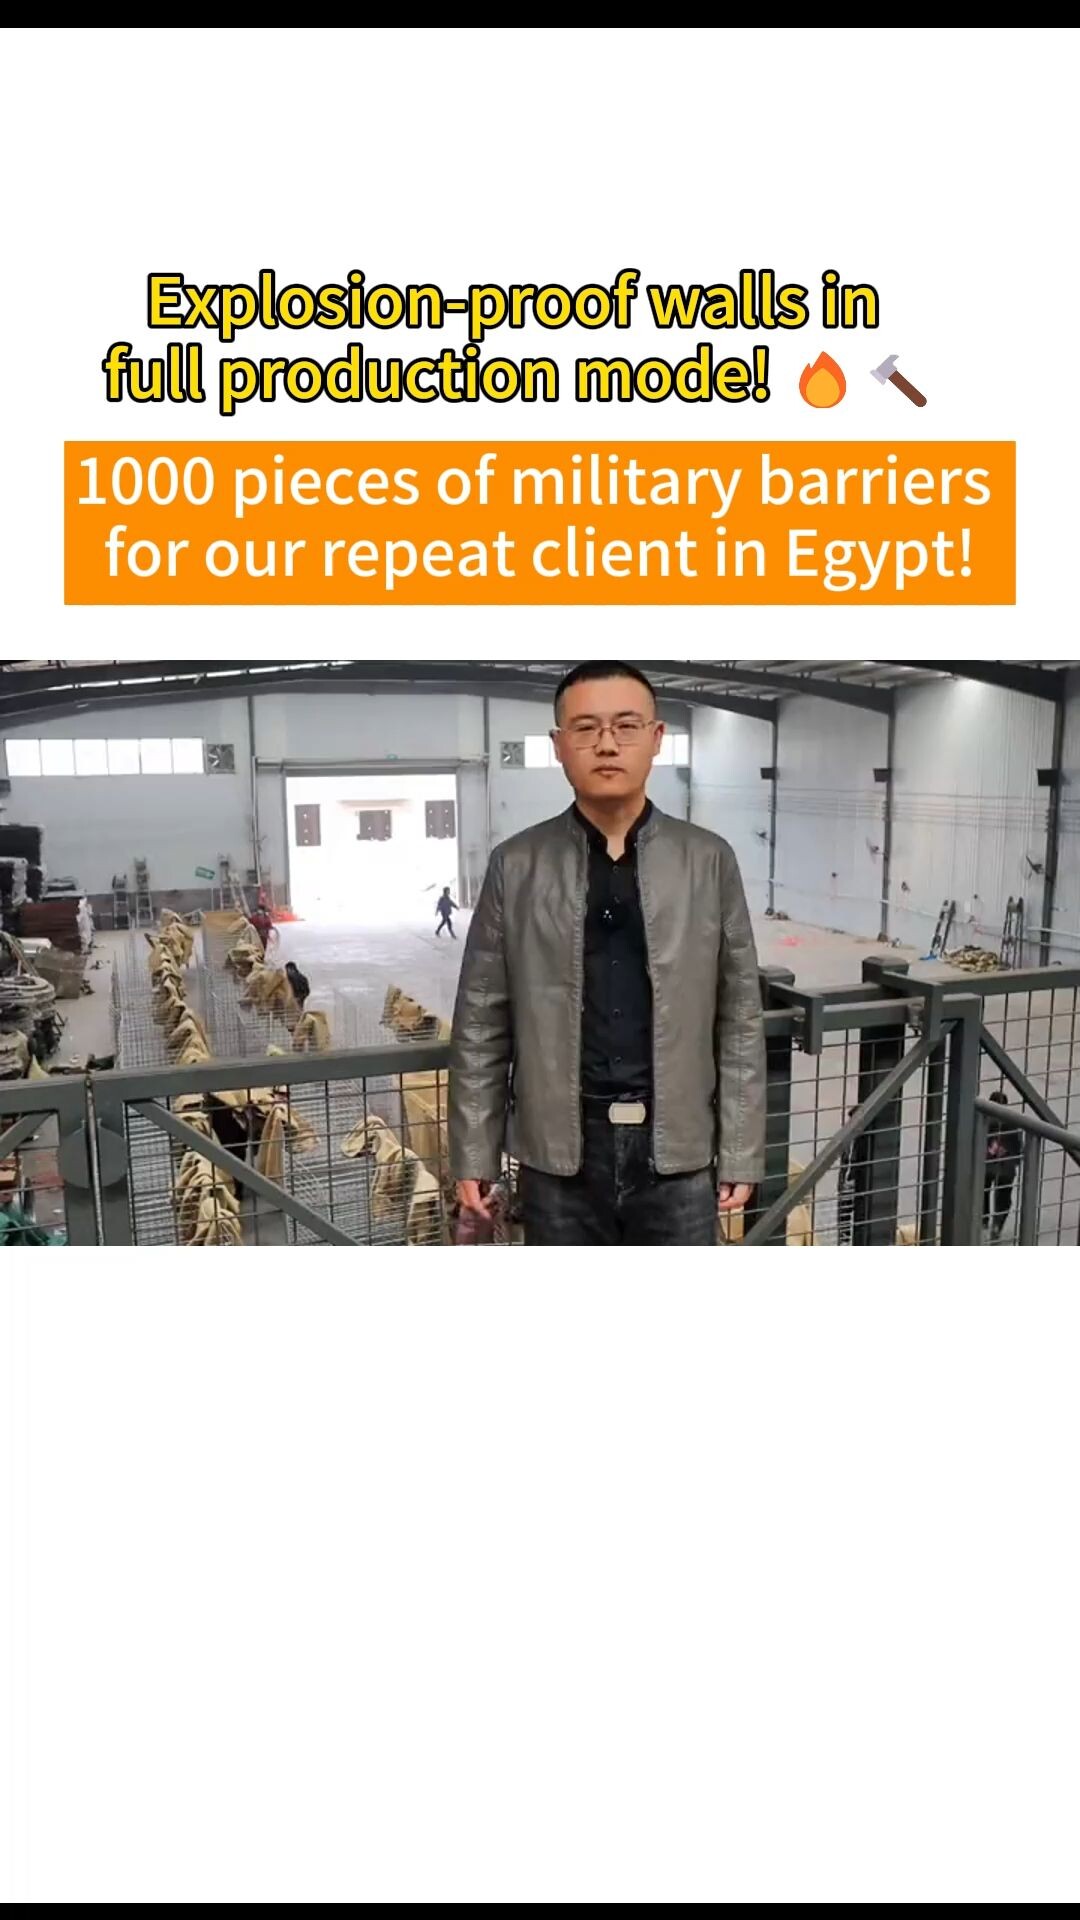 Second order from our Egyptian client 1000 pieces! Military barriers in full production mode thumbnail